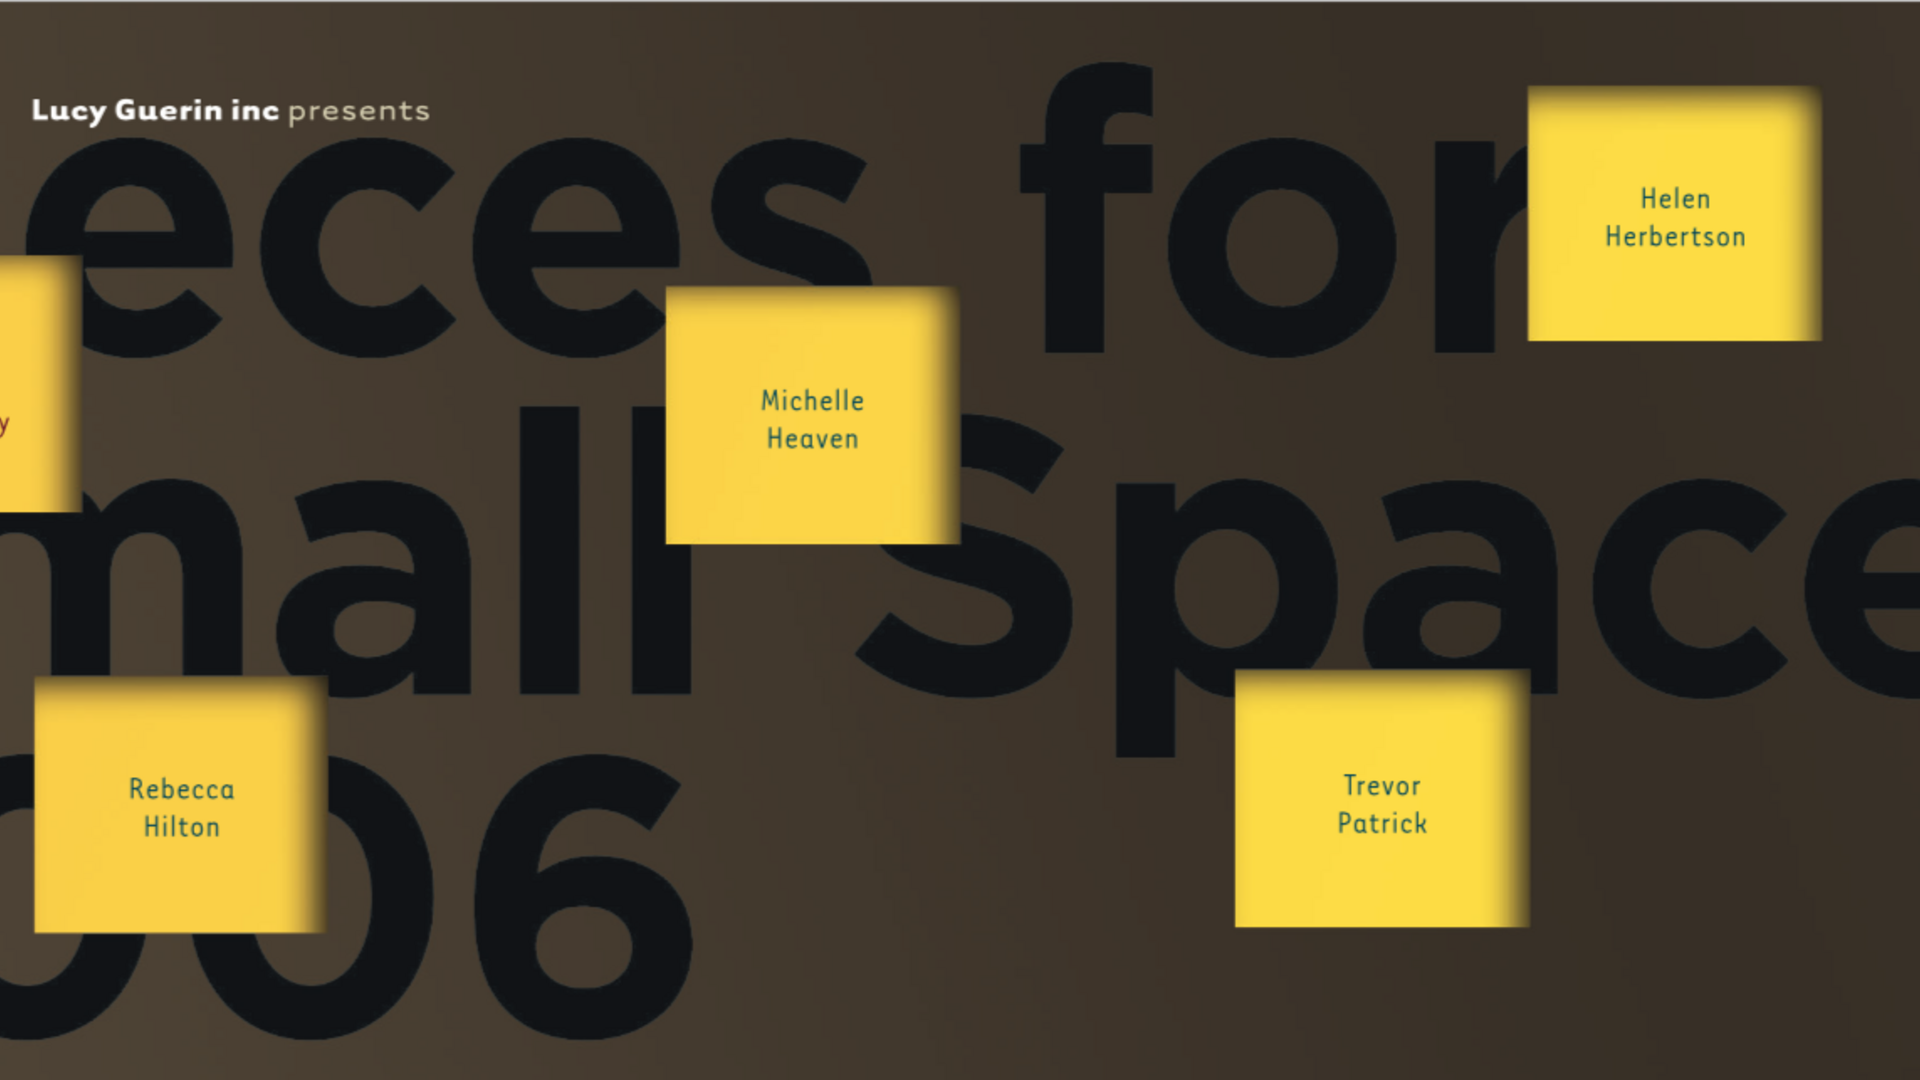 Poster for Pieces for Small Spaces 2006 with text in small yellow squares on a dark brown background